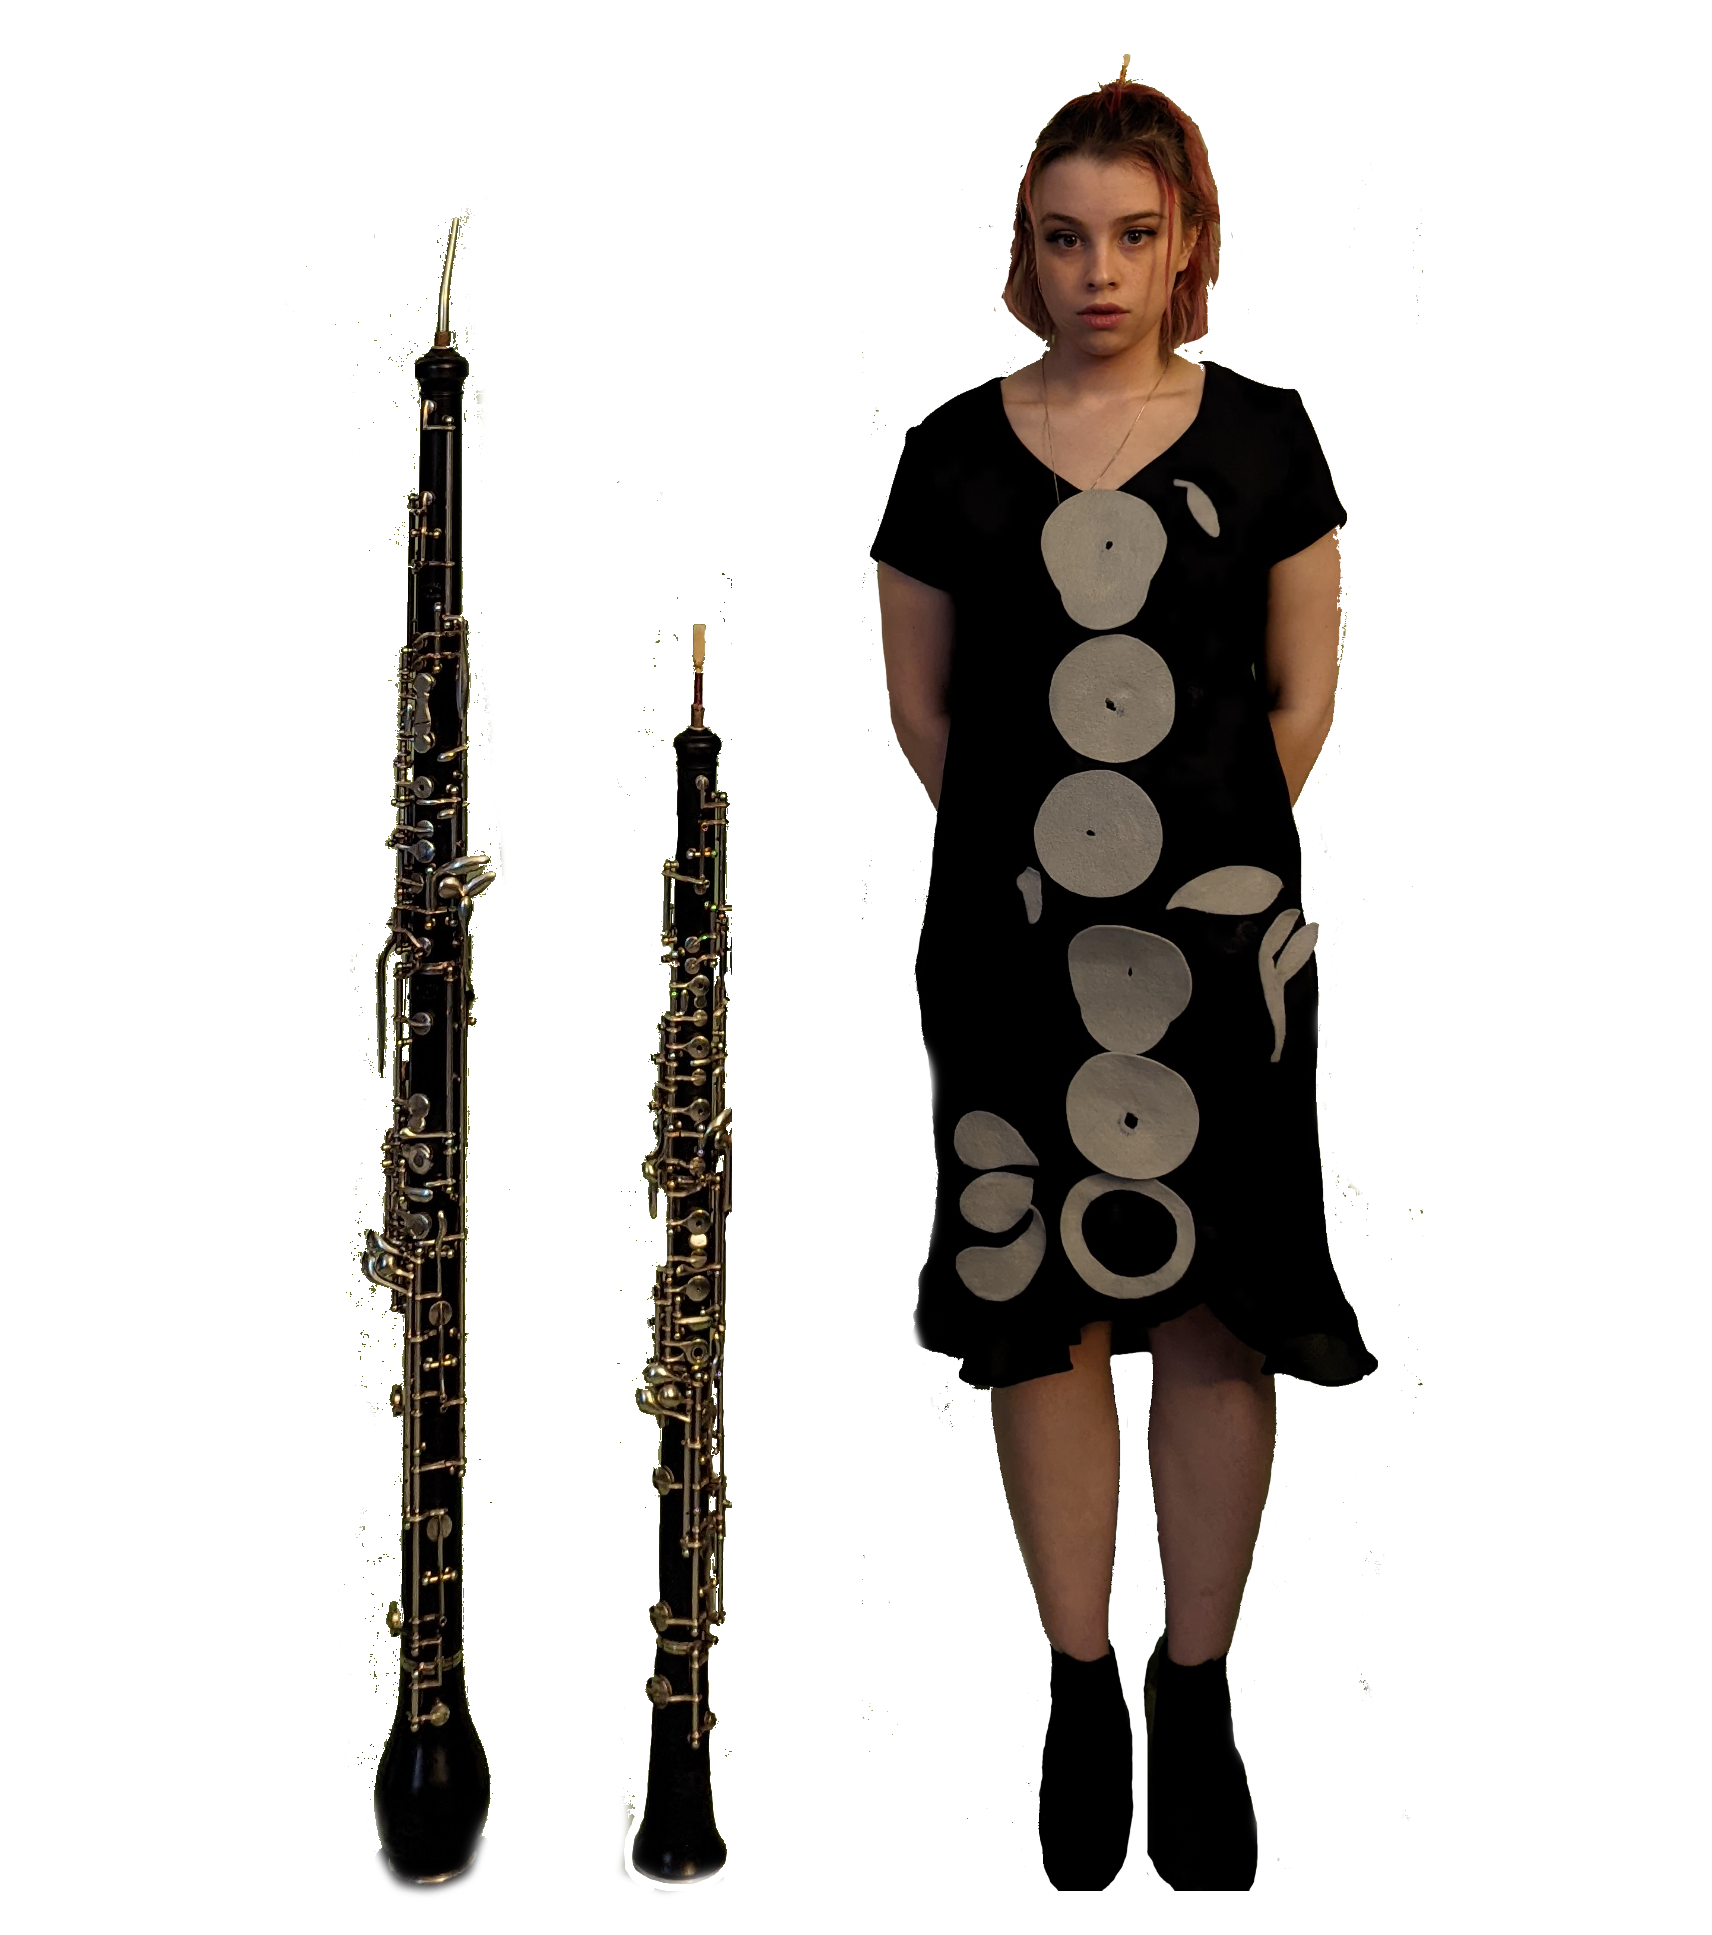 Katarina Freedman standing next to two wind instruments. One is taller than Katarina's elbow, and one is almost as tall as Katarina.